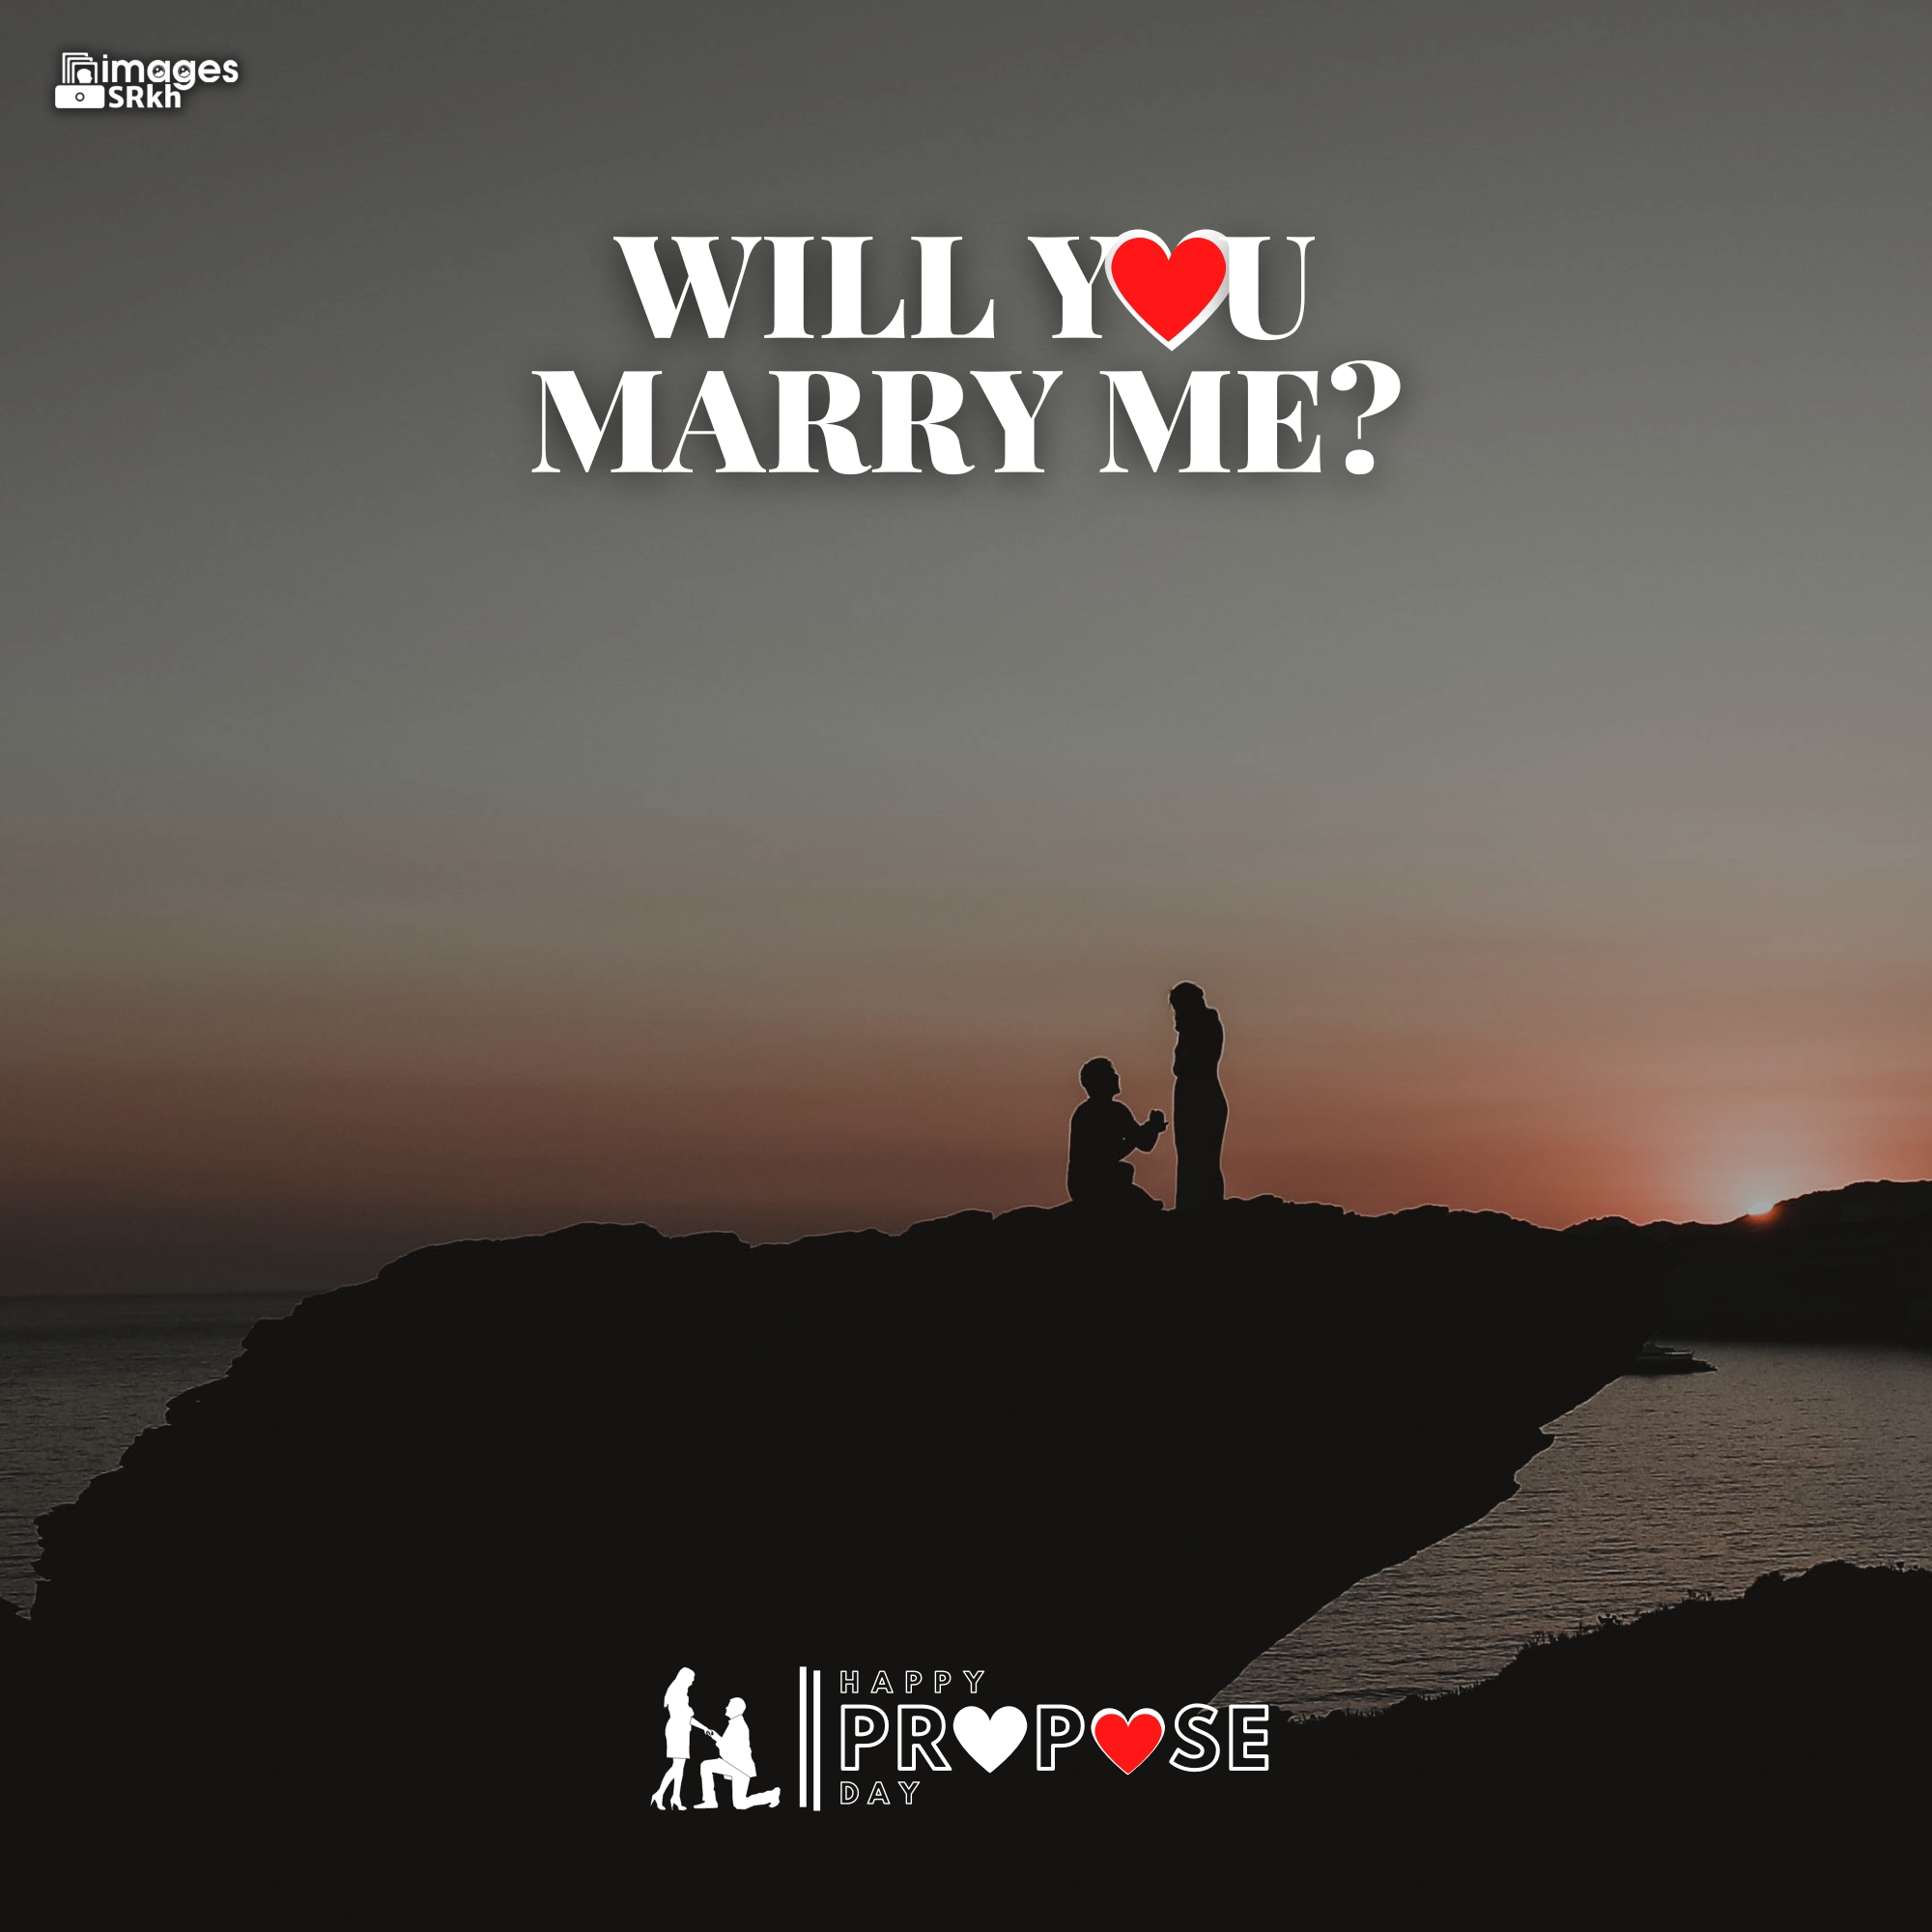 Propose Day Images | 297 | Will You MARRY ME